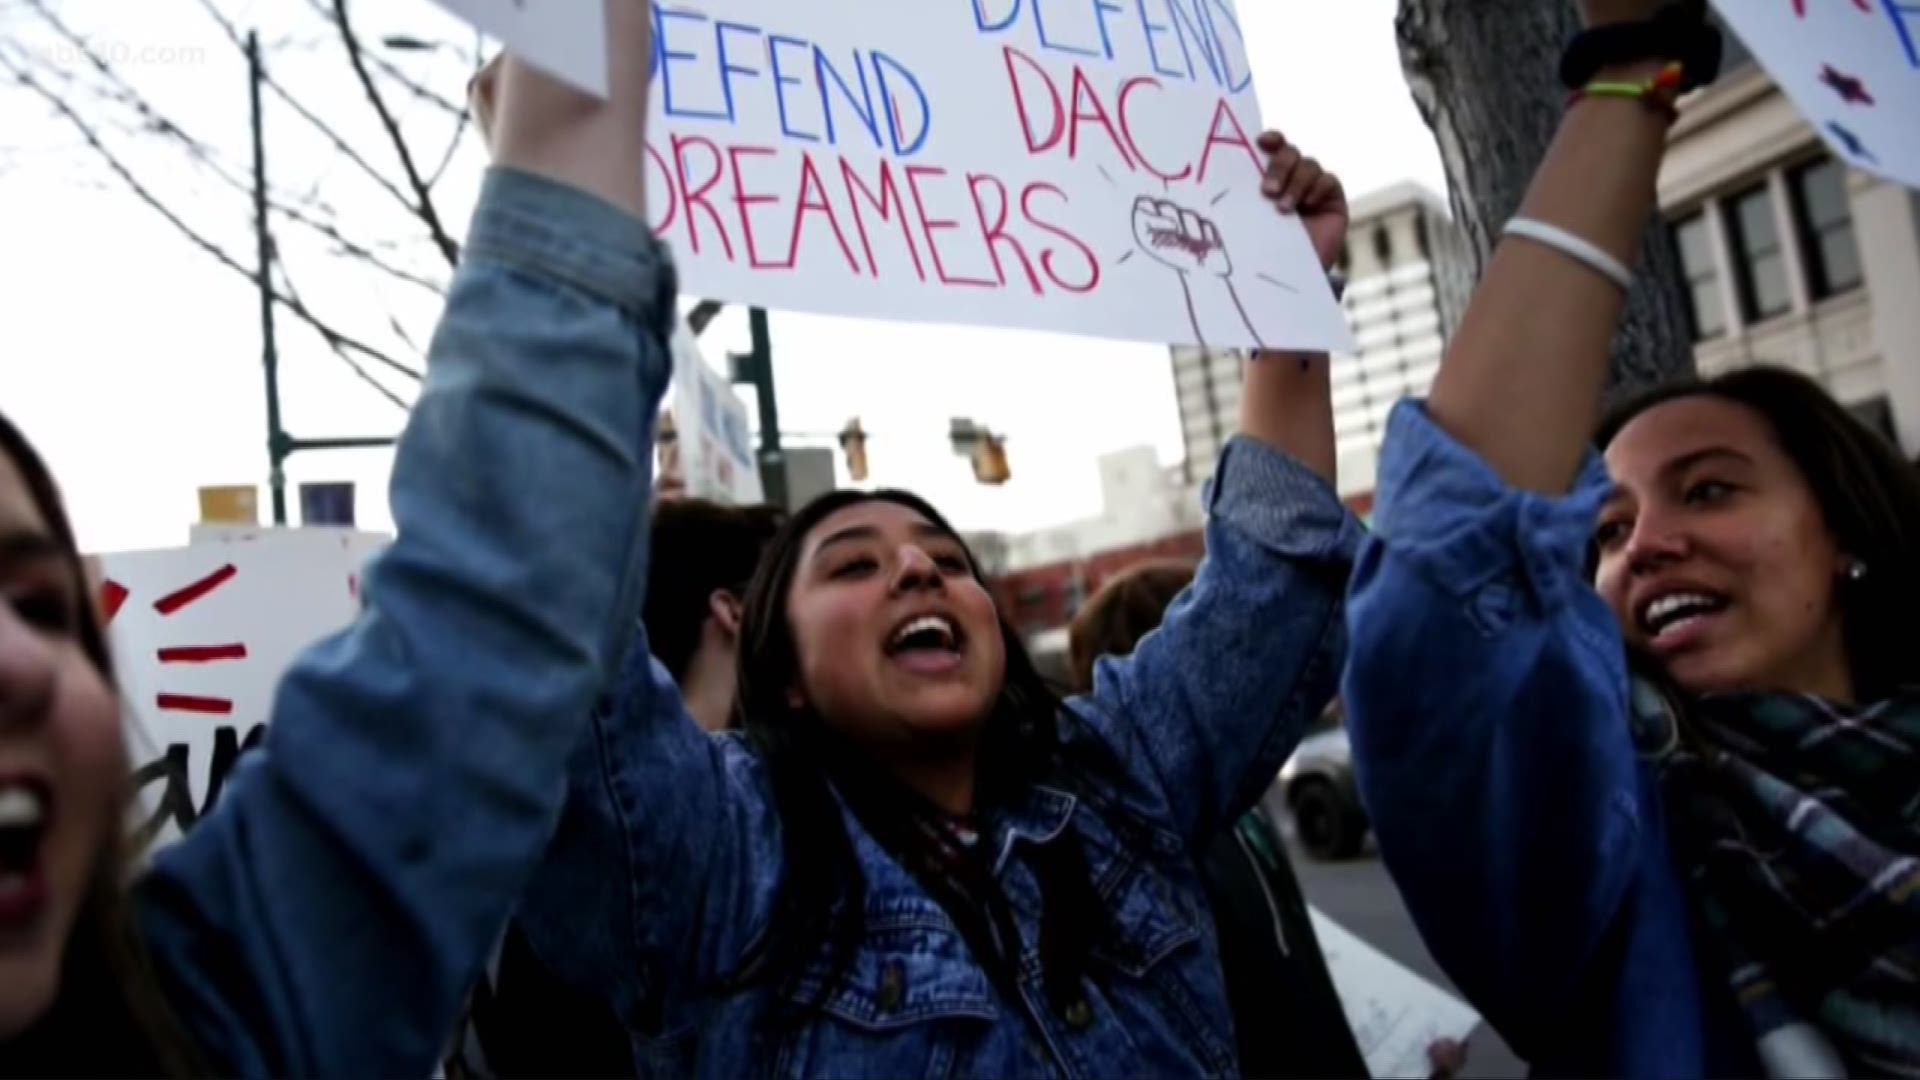 In a 5-4 ruling today, the court blocked President Trump from ending the "Deferred Action for Childhood Arrivals" program known as DACA.